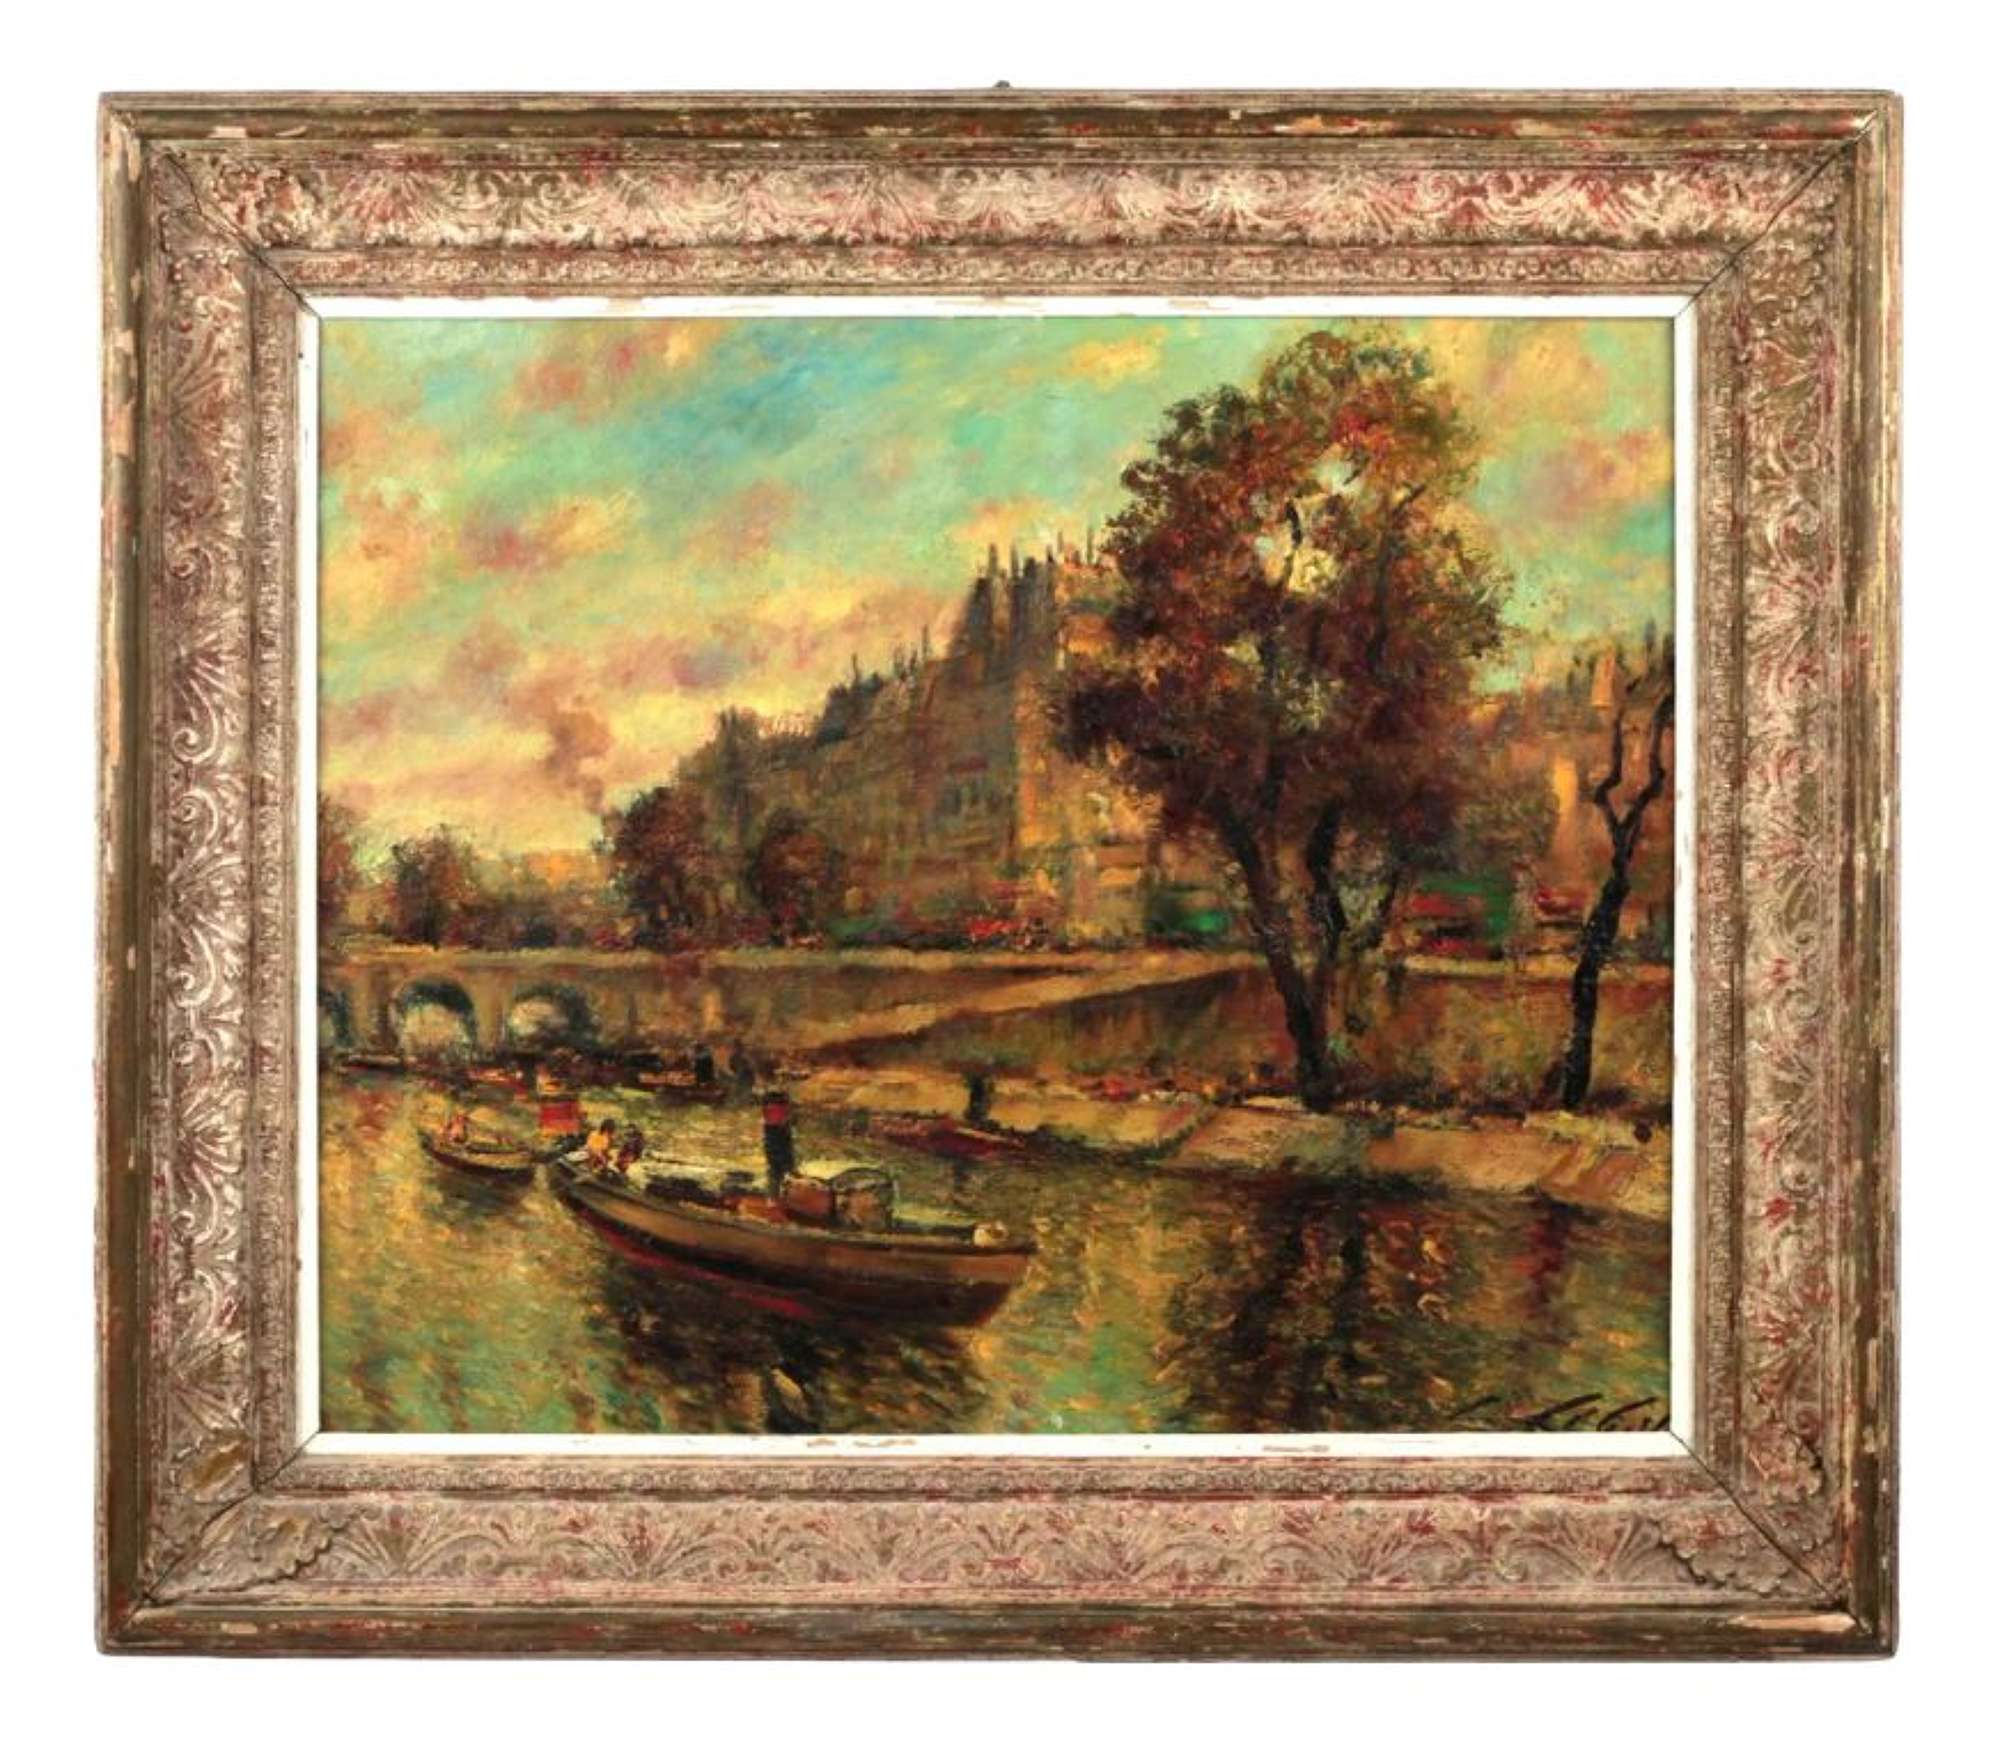 L Liebert, View of Paris from the Seine, 20th Century, Oil on Canvas, Framed